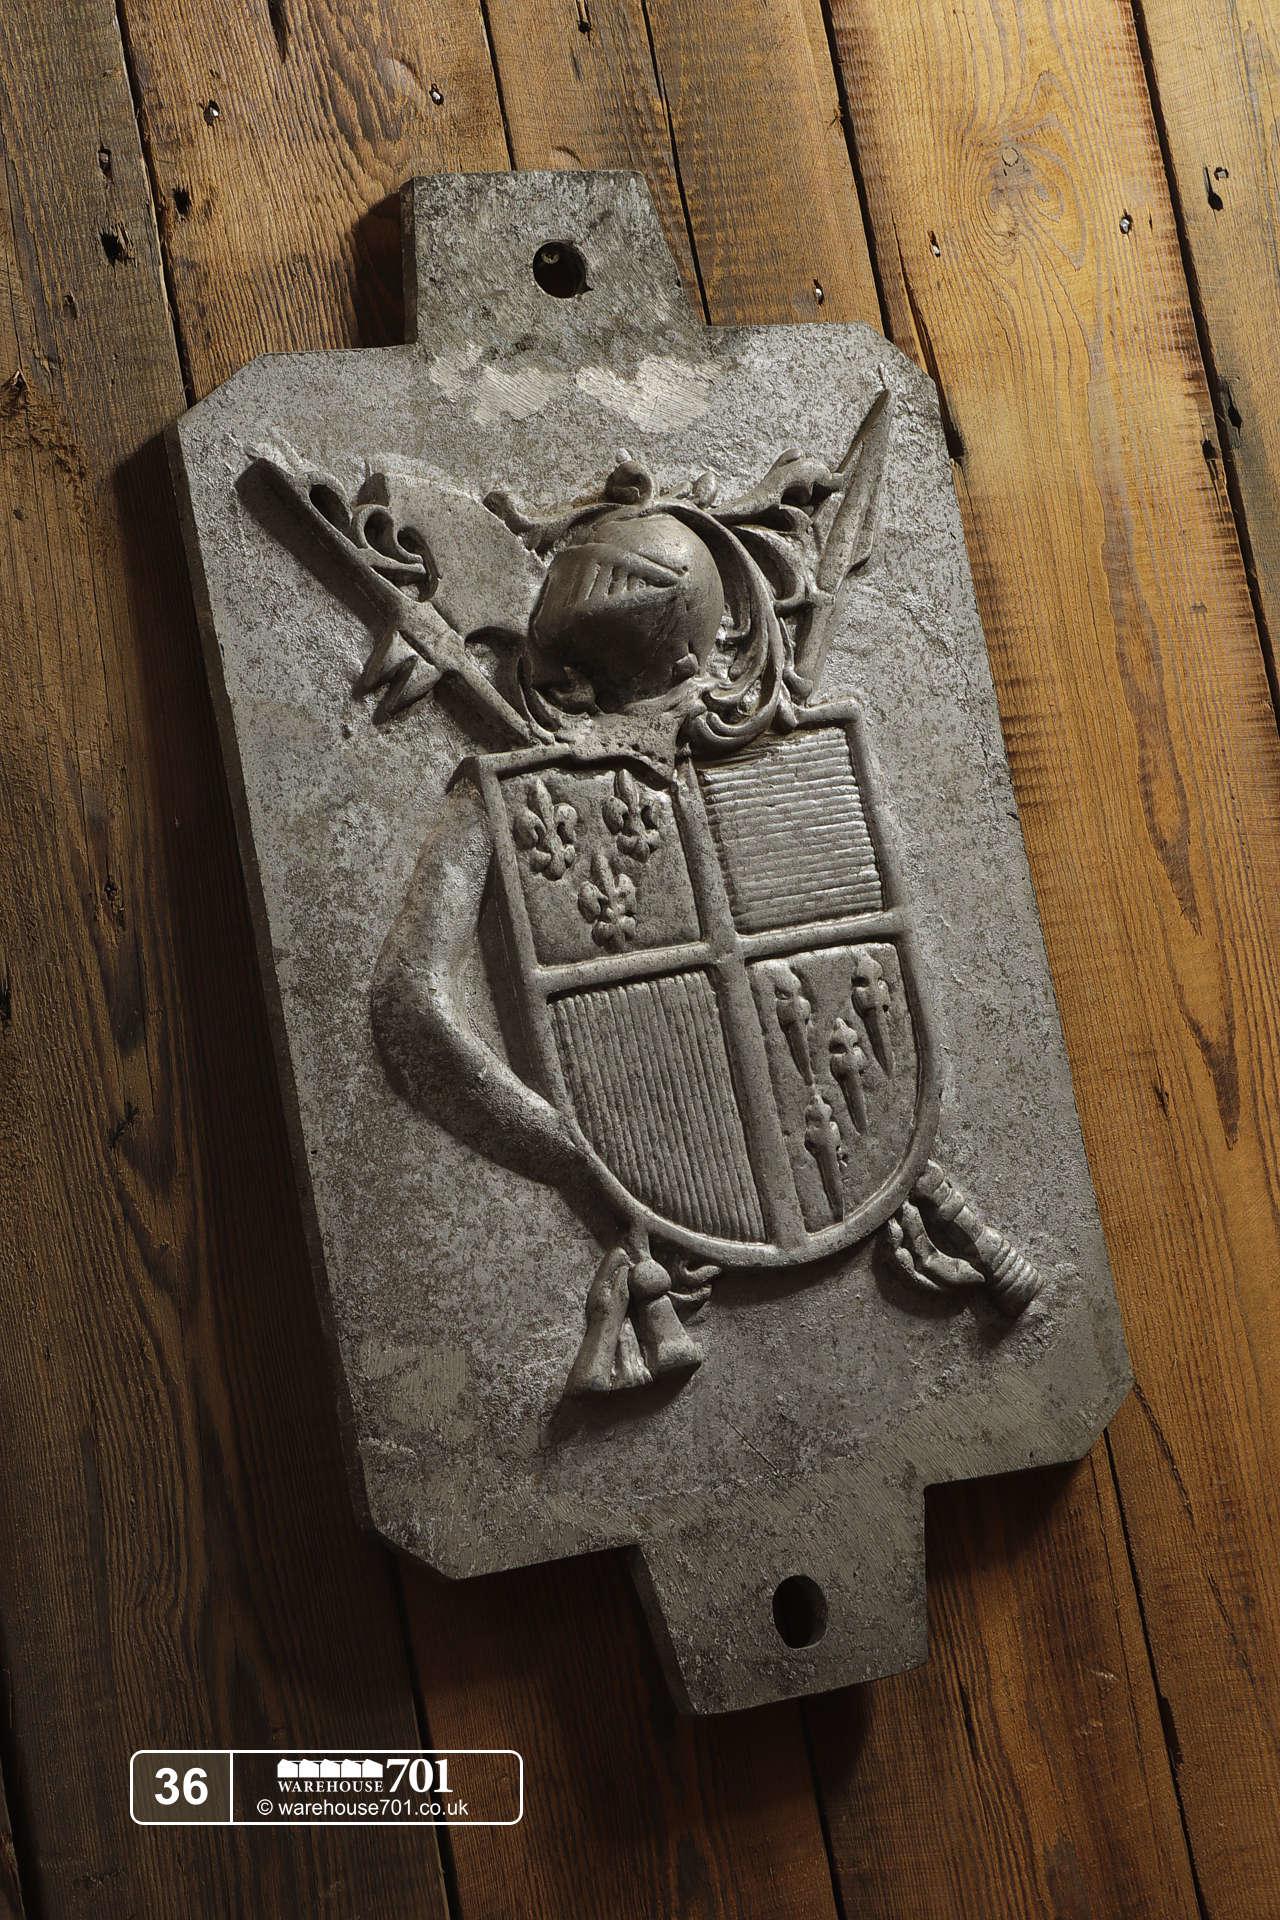 Aluminium Foundry Castings of Heraldic Crests (No's 35, 36, 37) for Shop, Retail and Home Display #7